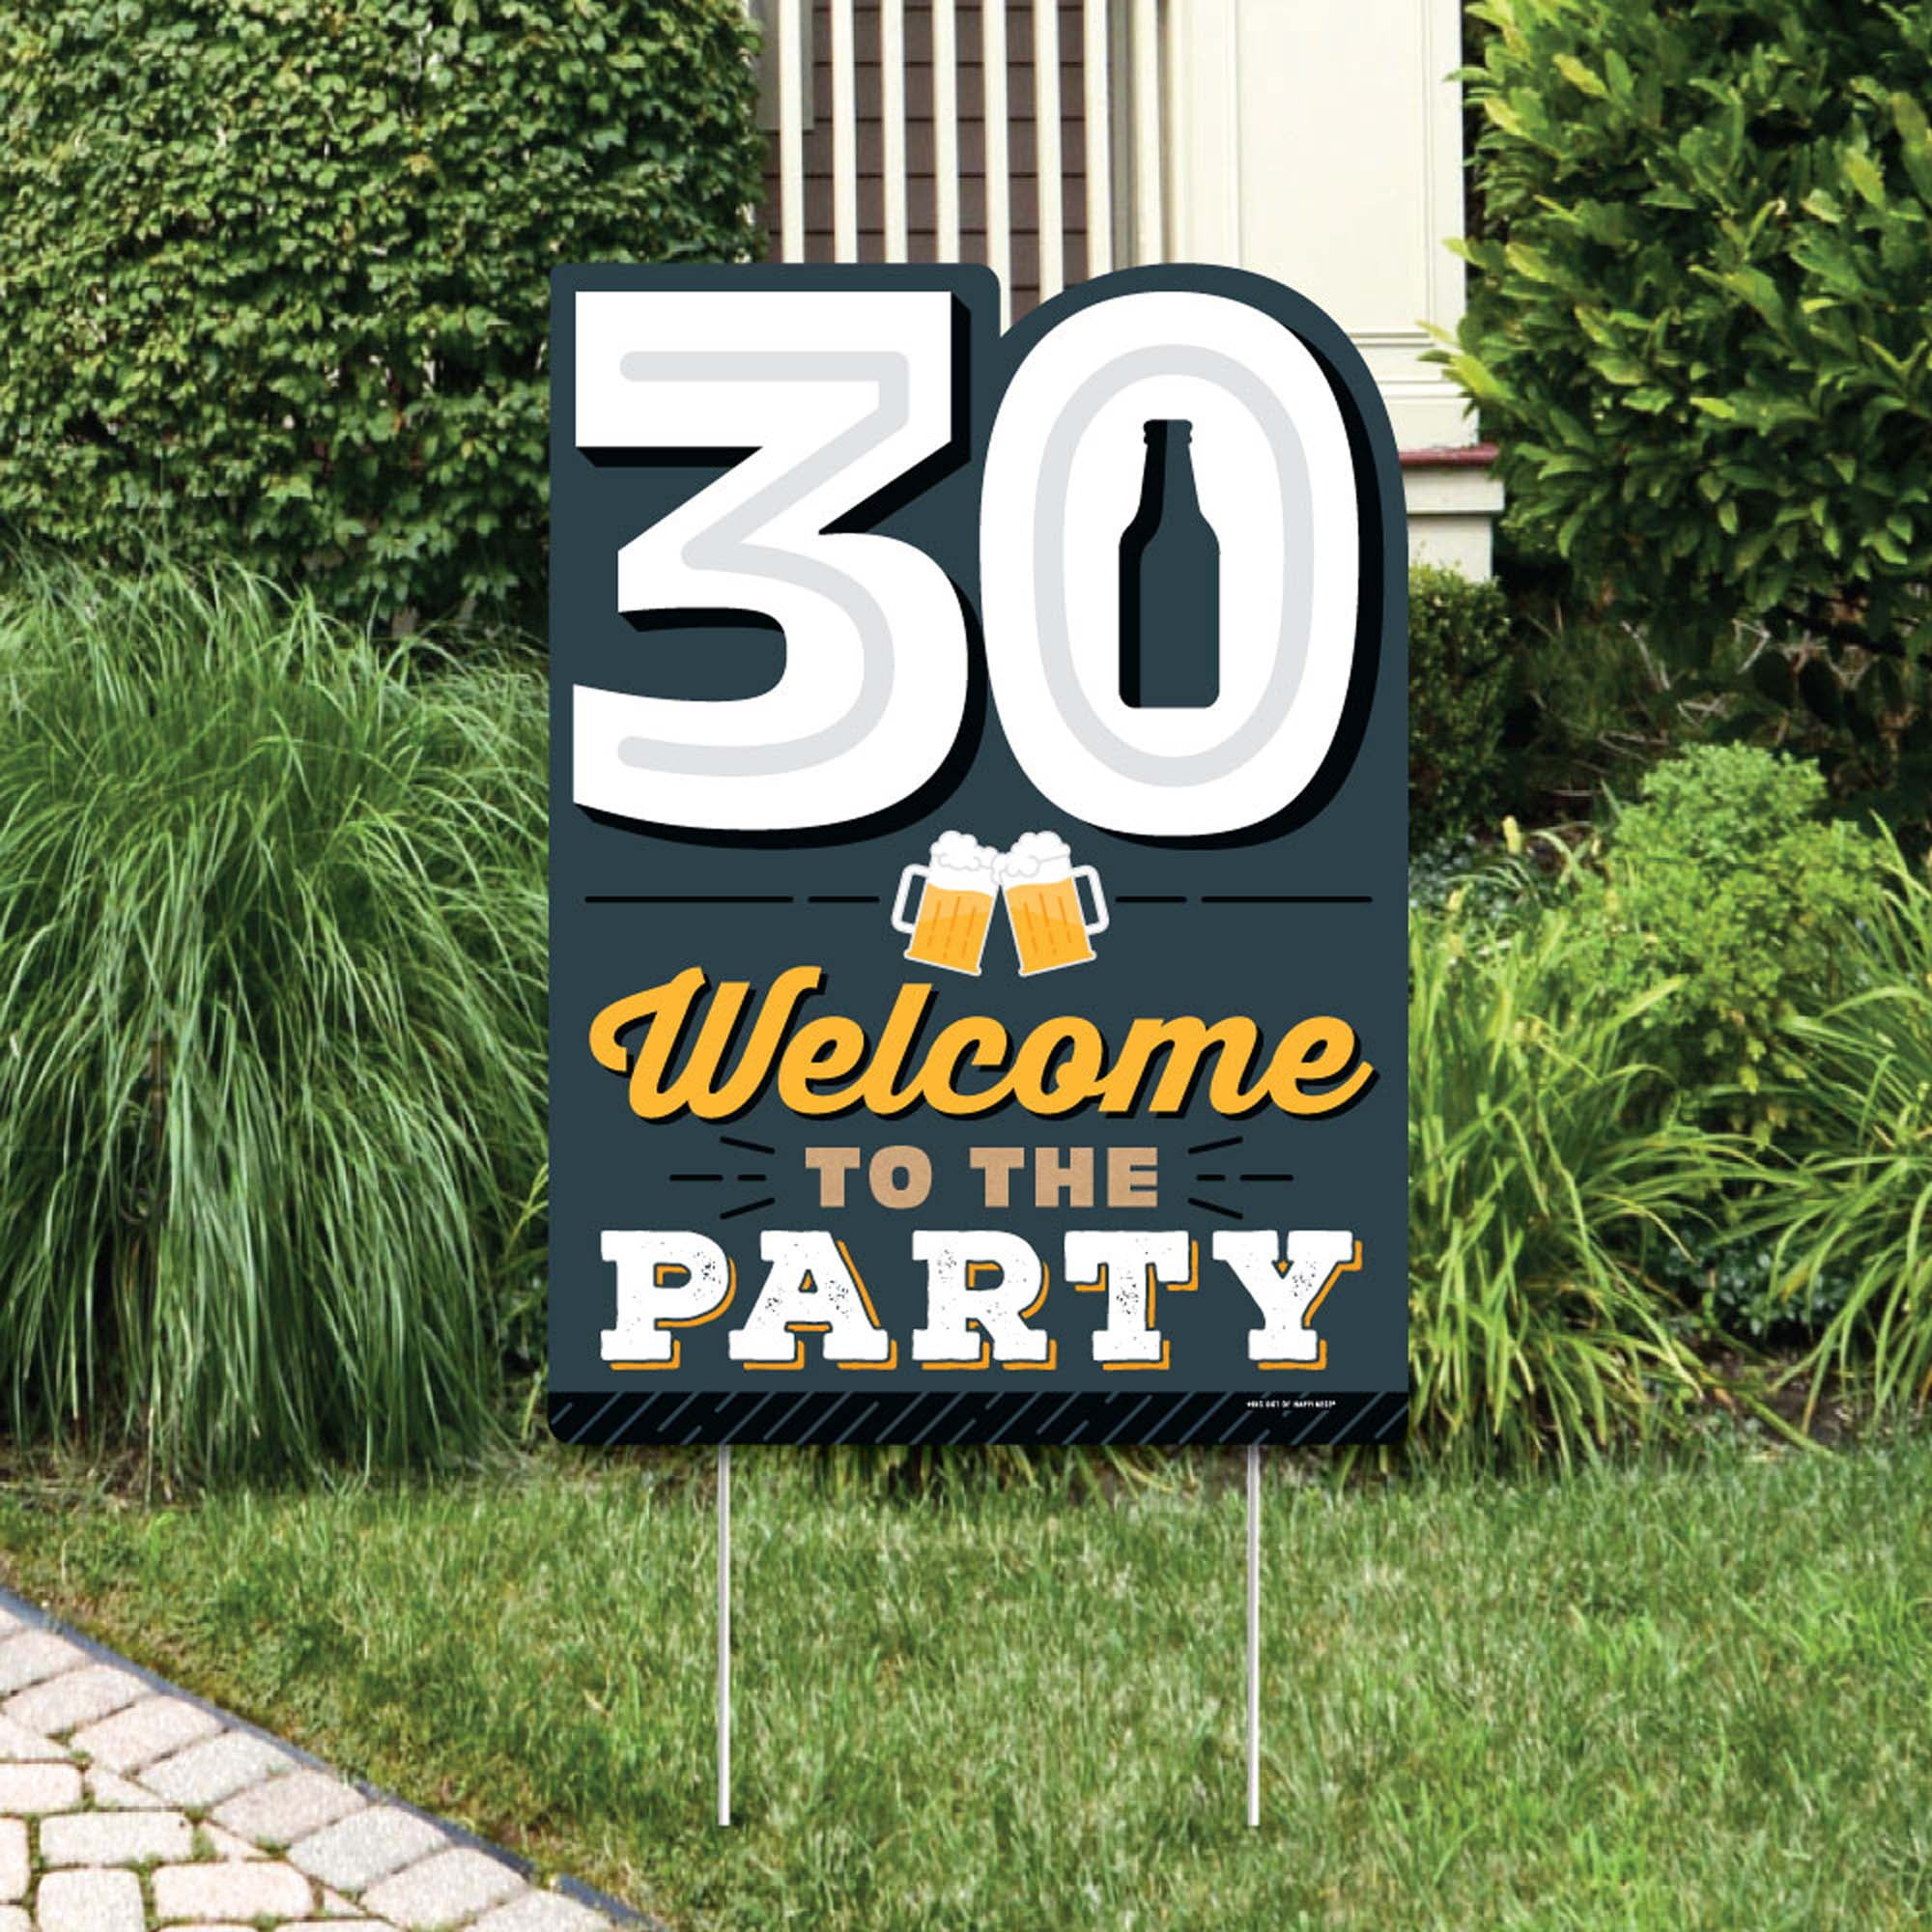 CHEERS AND BEERS TO THRITY YEARS BIRTHDAY Advertising Vinyl Banner Flag Sign 